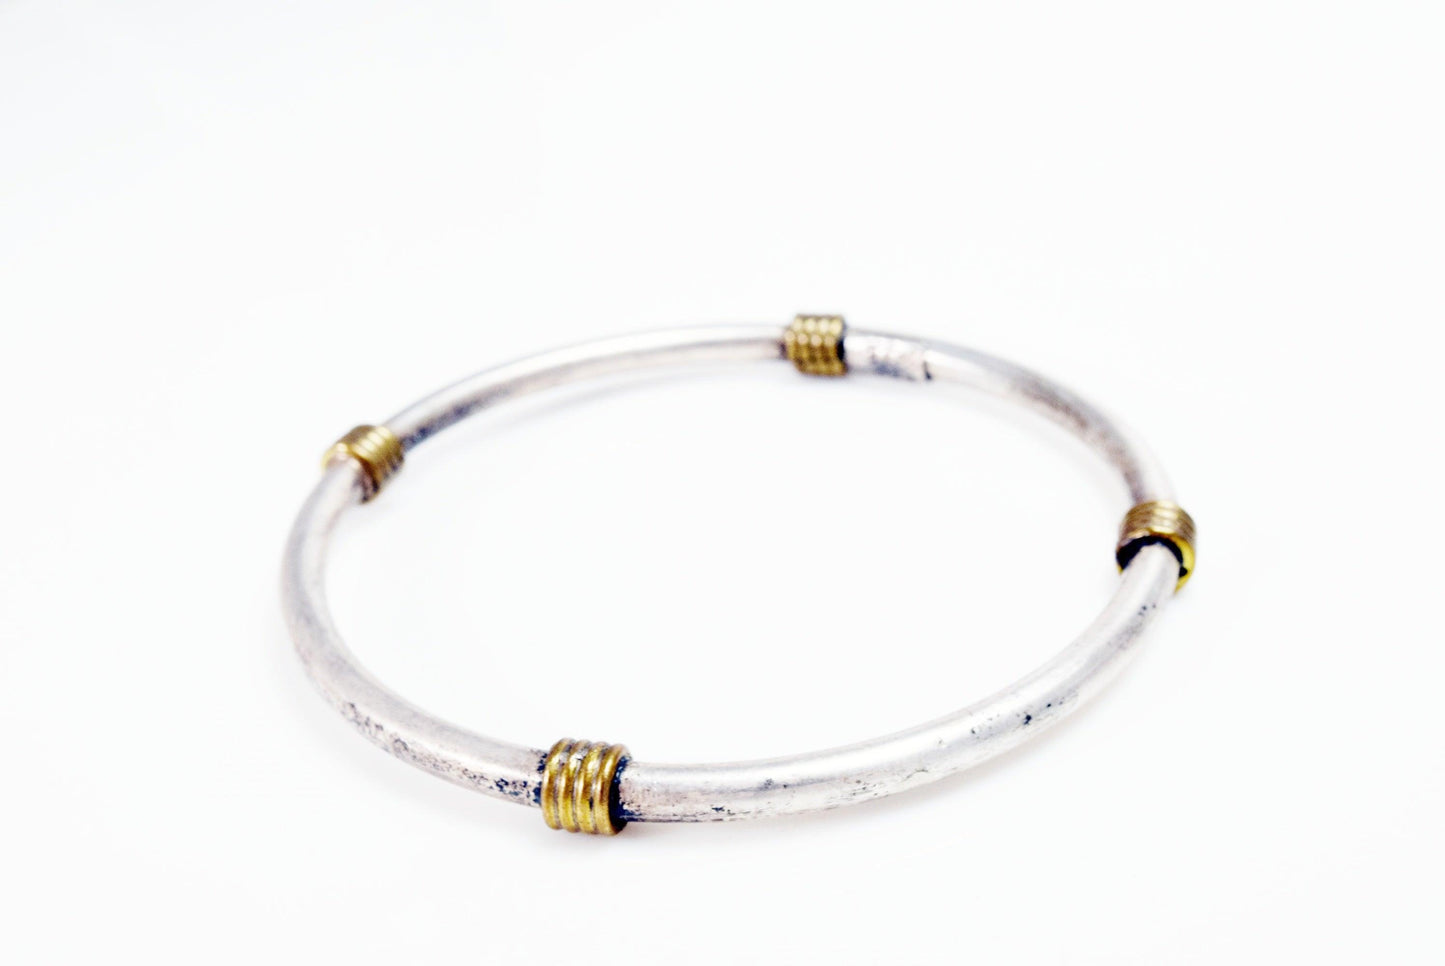 Vintage Two Tone Mexican Bangle Sterling Silver and Brass - Anteeka